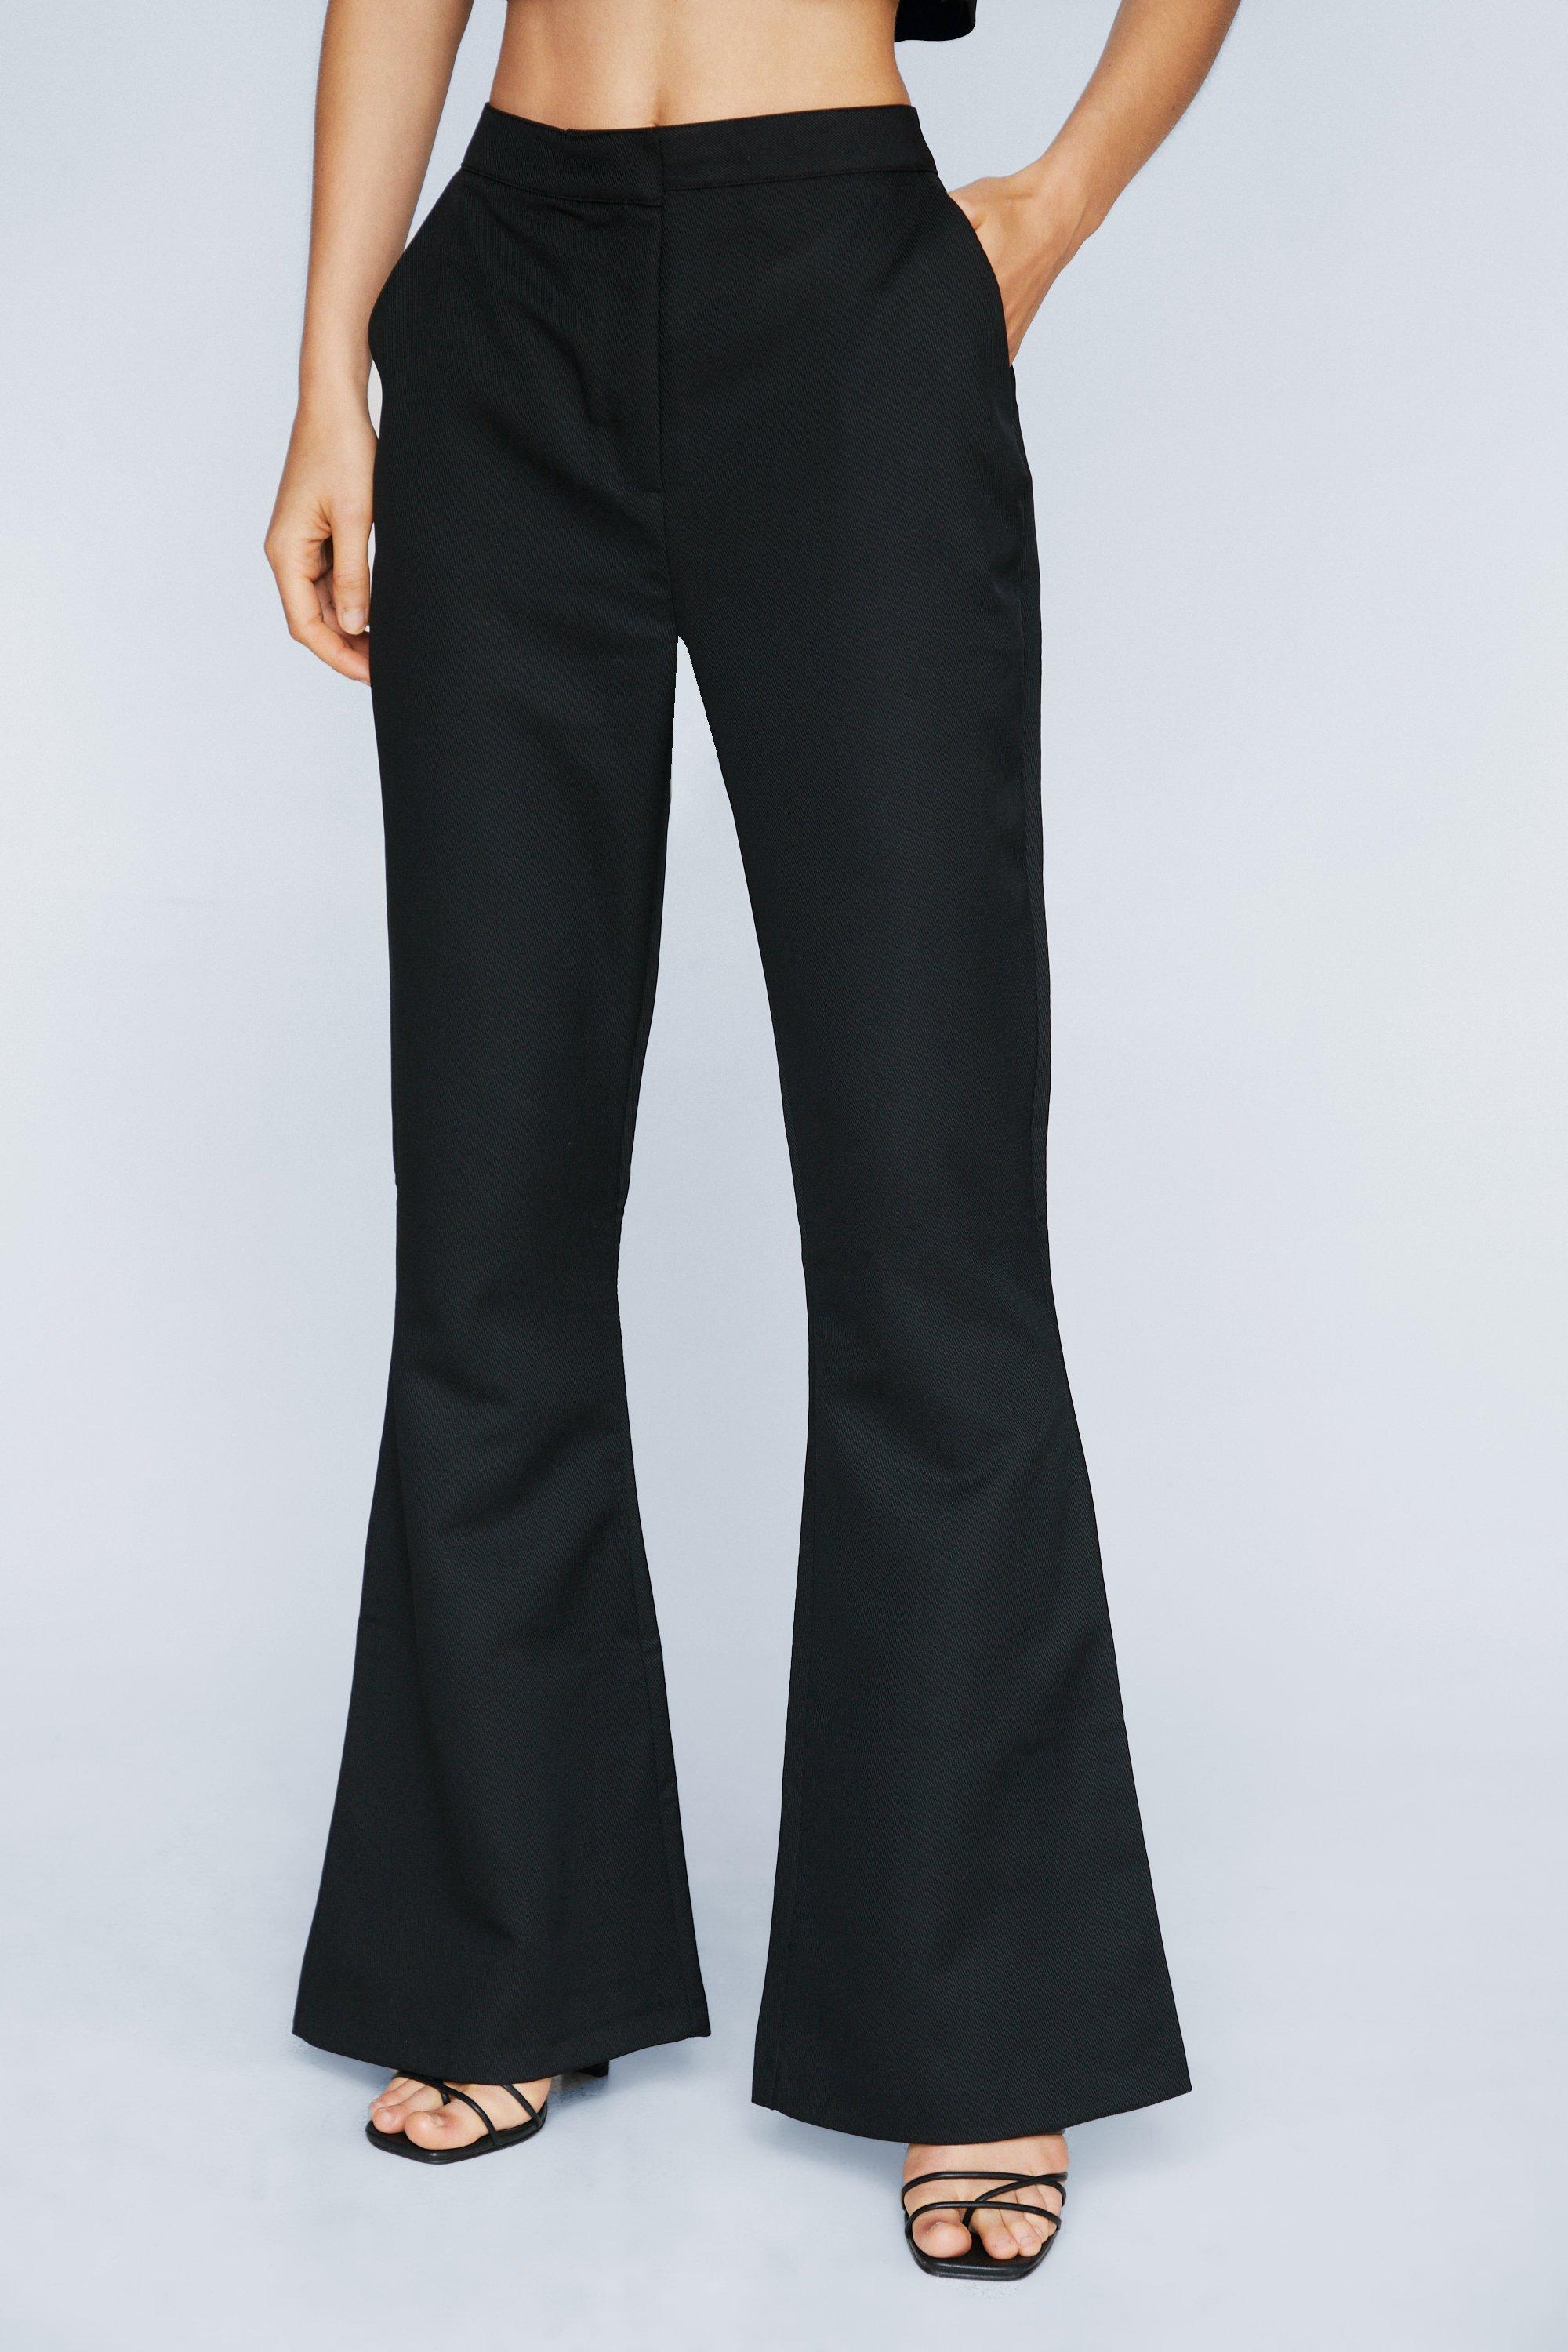 Tailored High Waist Black Flared Trousers